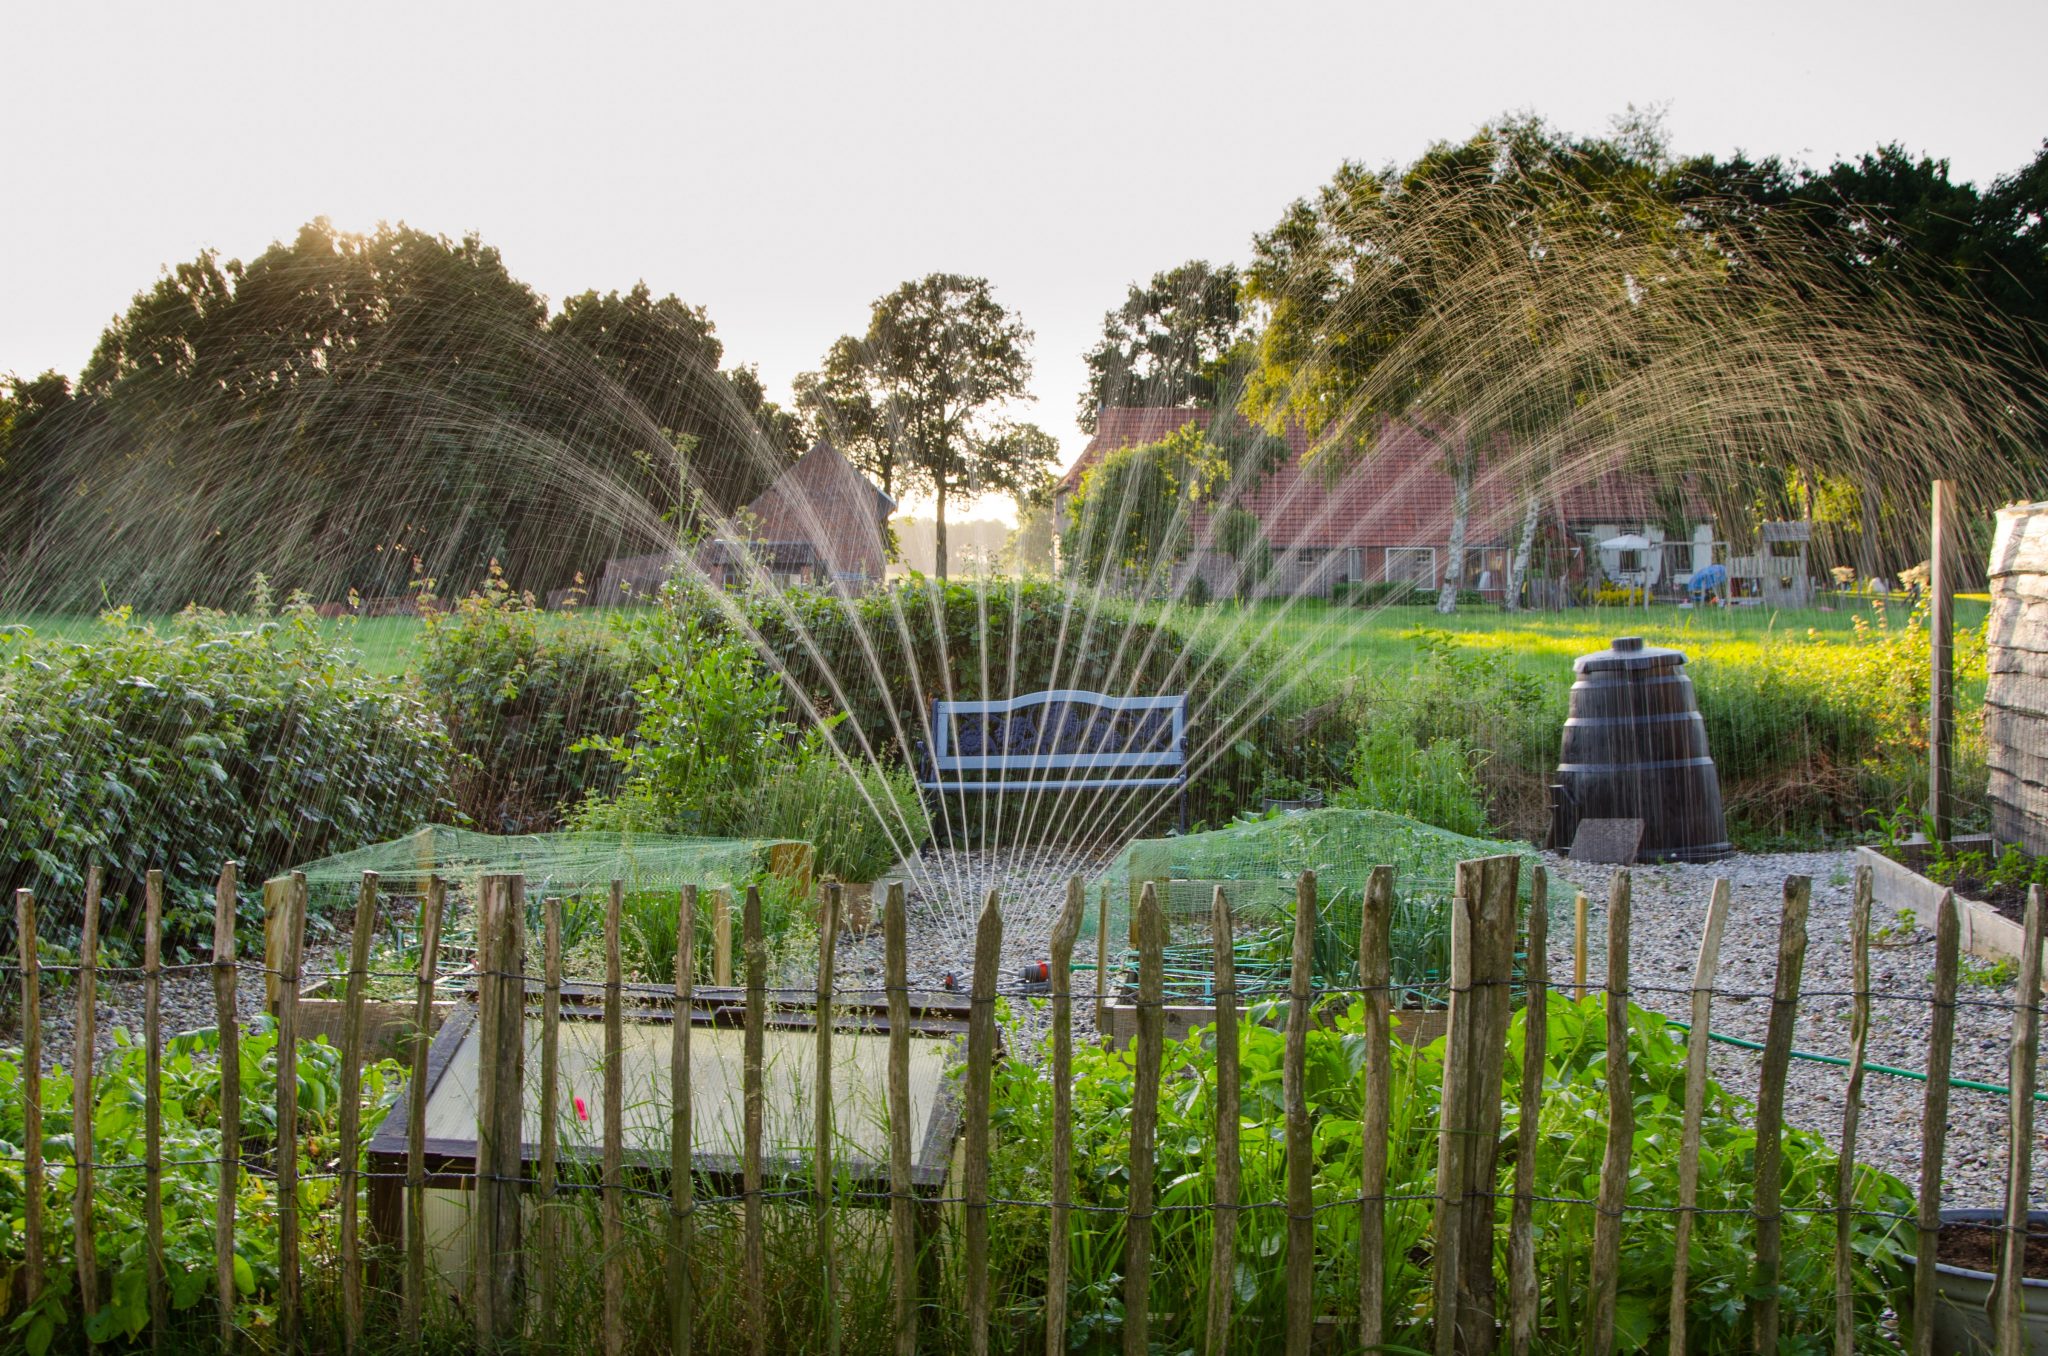 Check out these tips for a better spring irrigation setup.